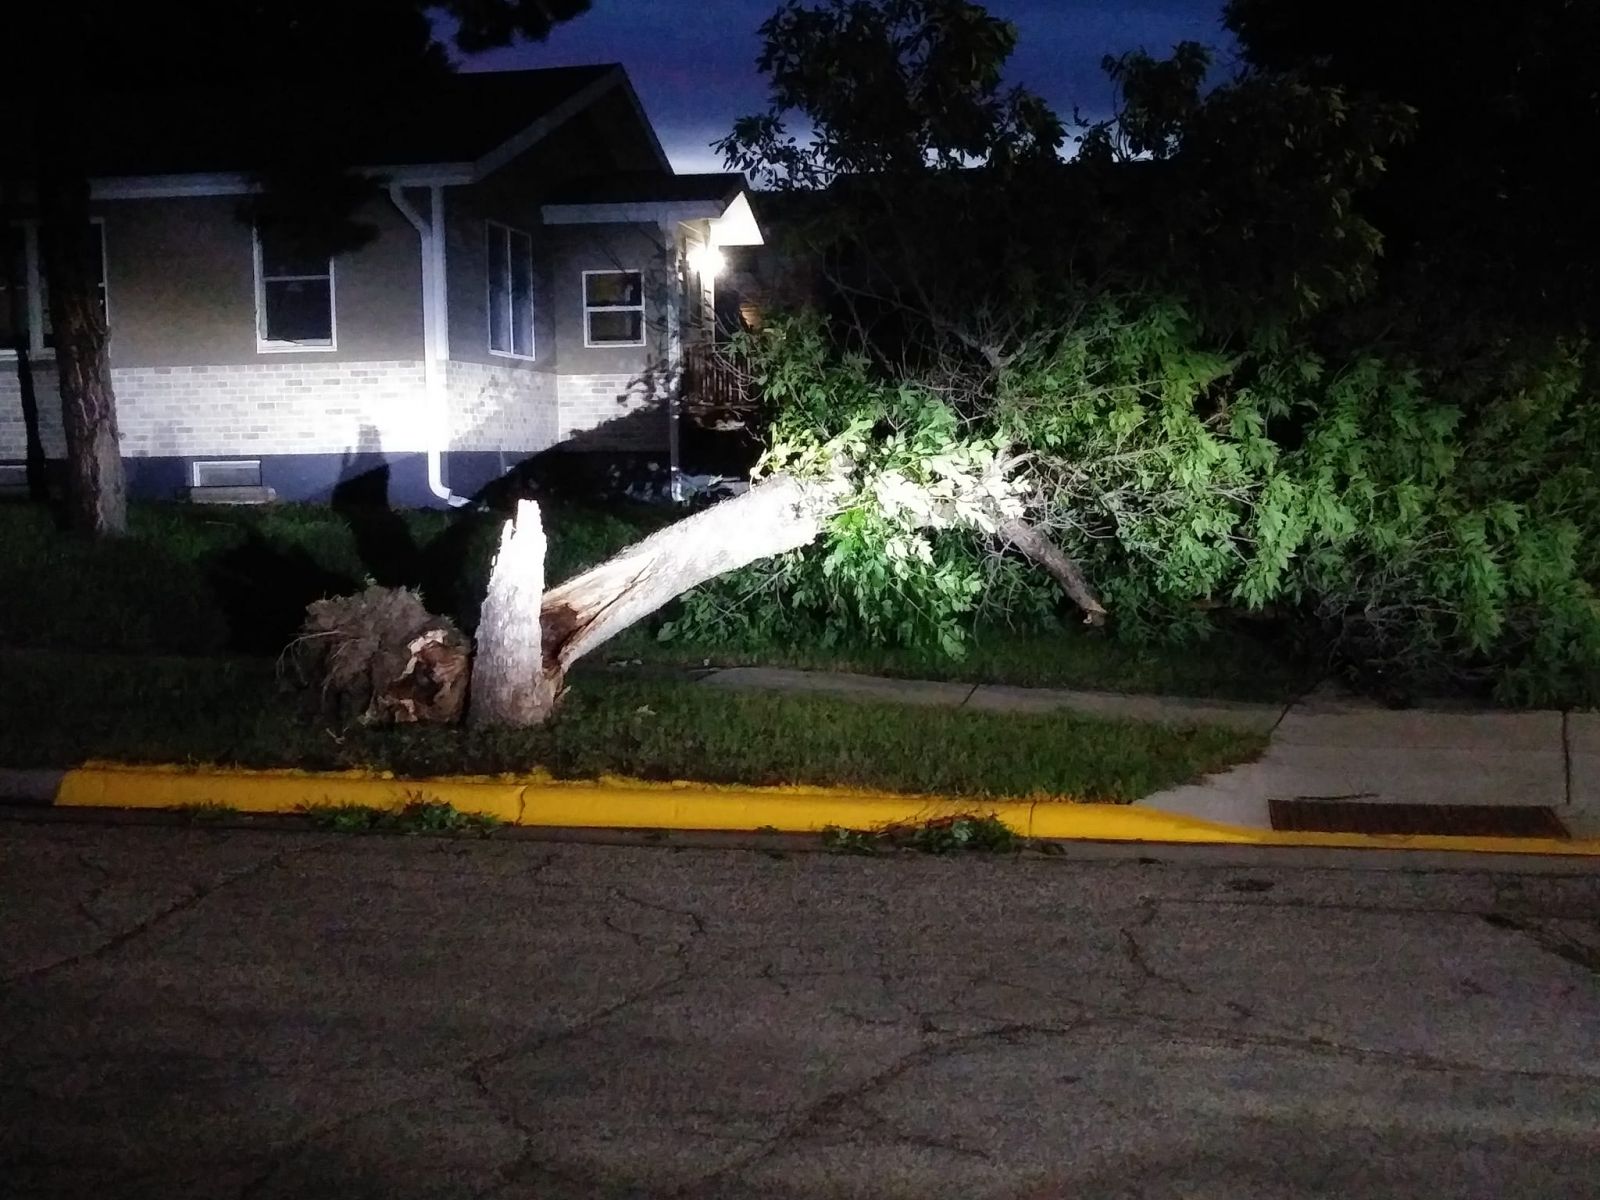 Tree snapped at the base of the trunk. Photo credit KCCR Pierre.